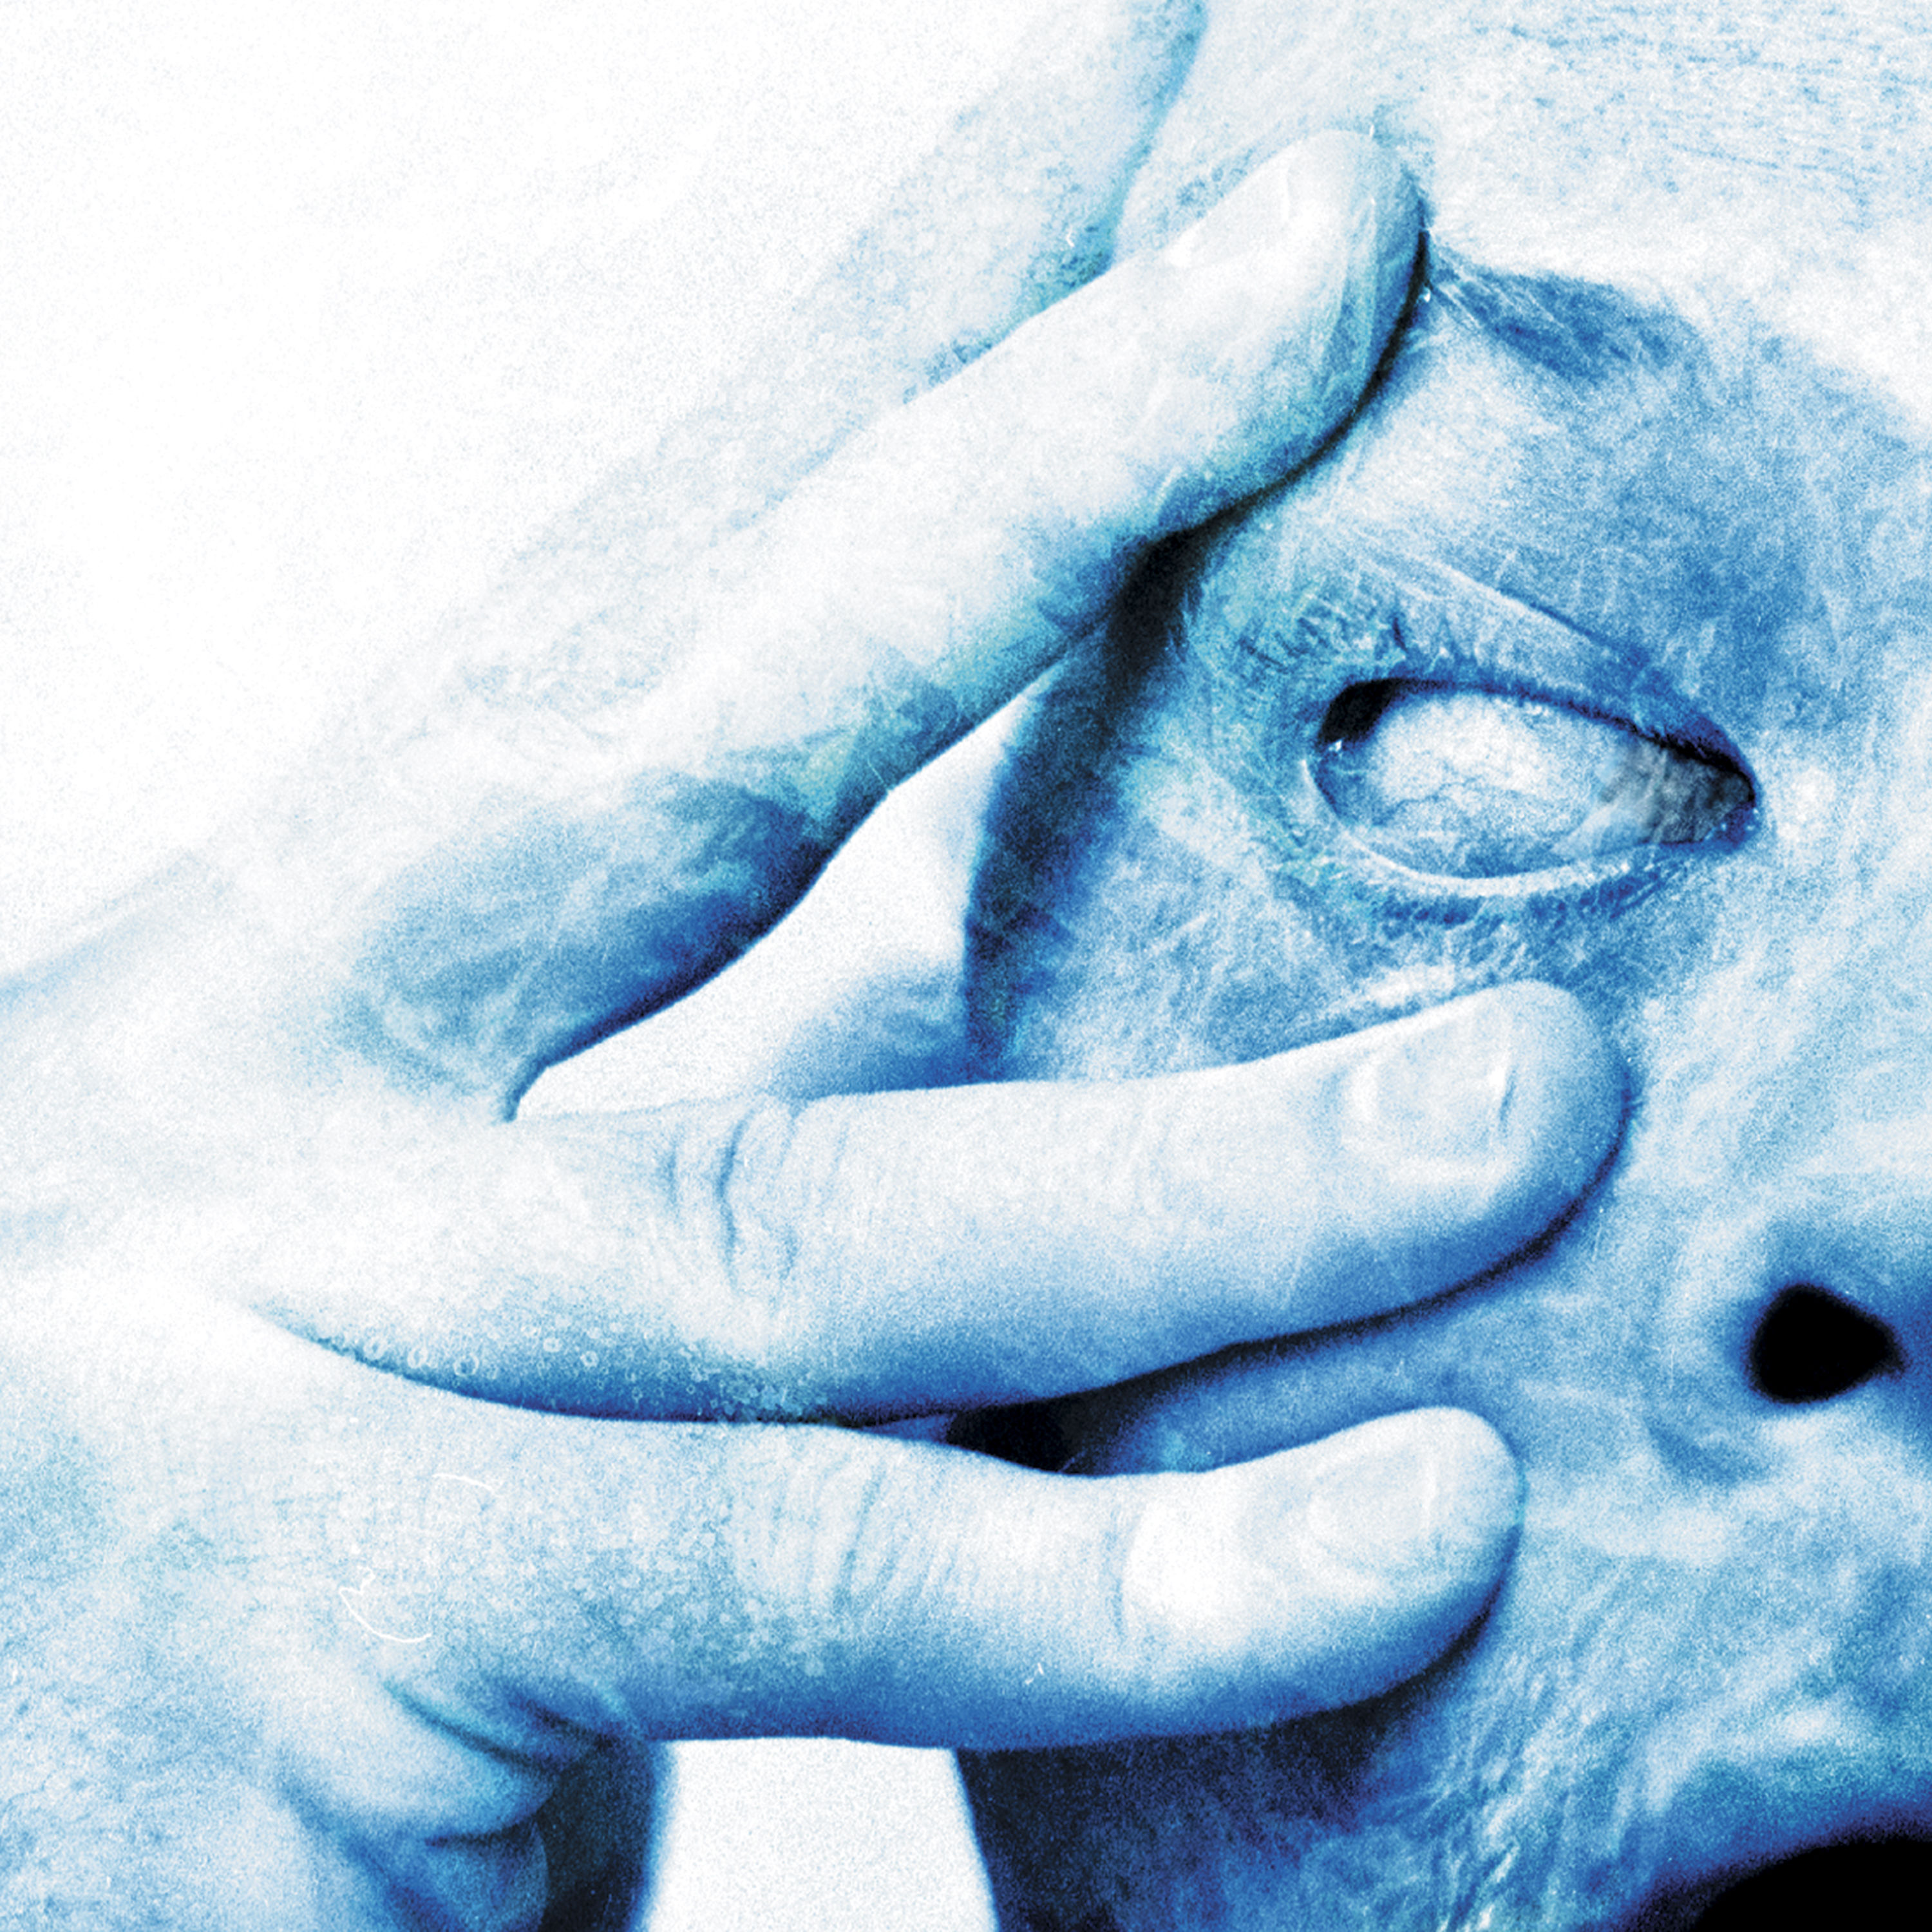 Porcupine Tree – In Absentia (Remastered) (2002/2020) [FLAC 24bit/96kHz]